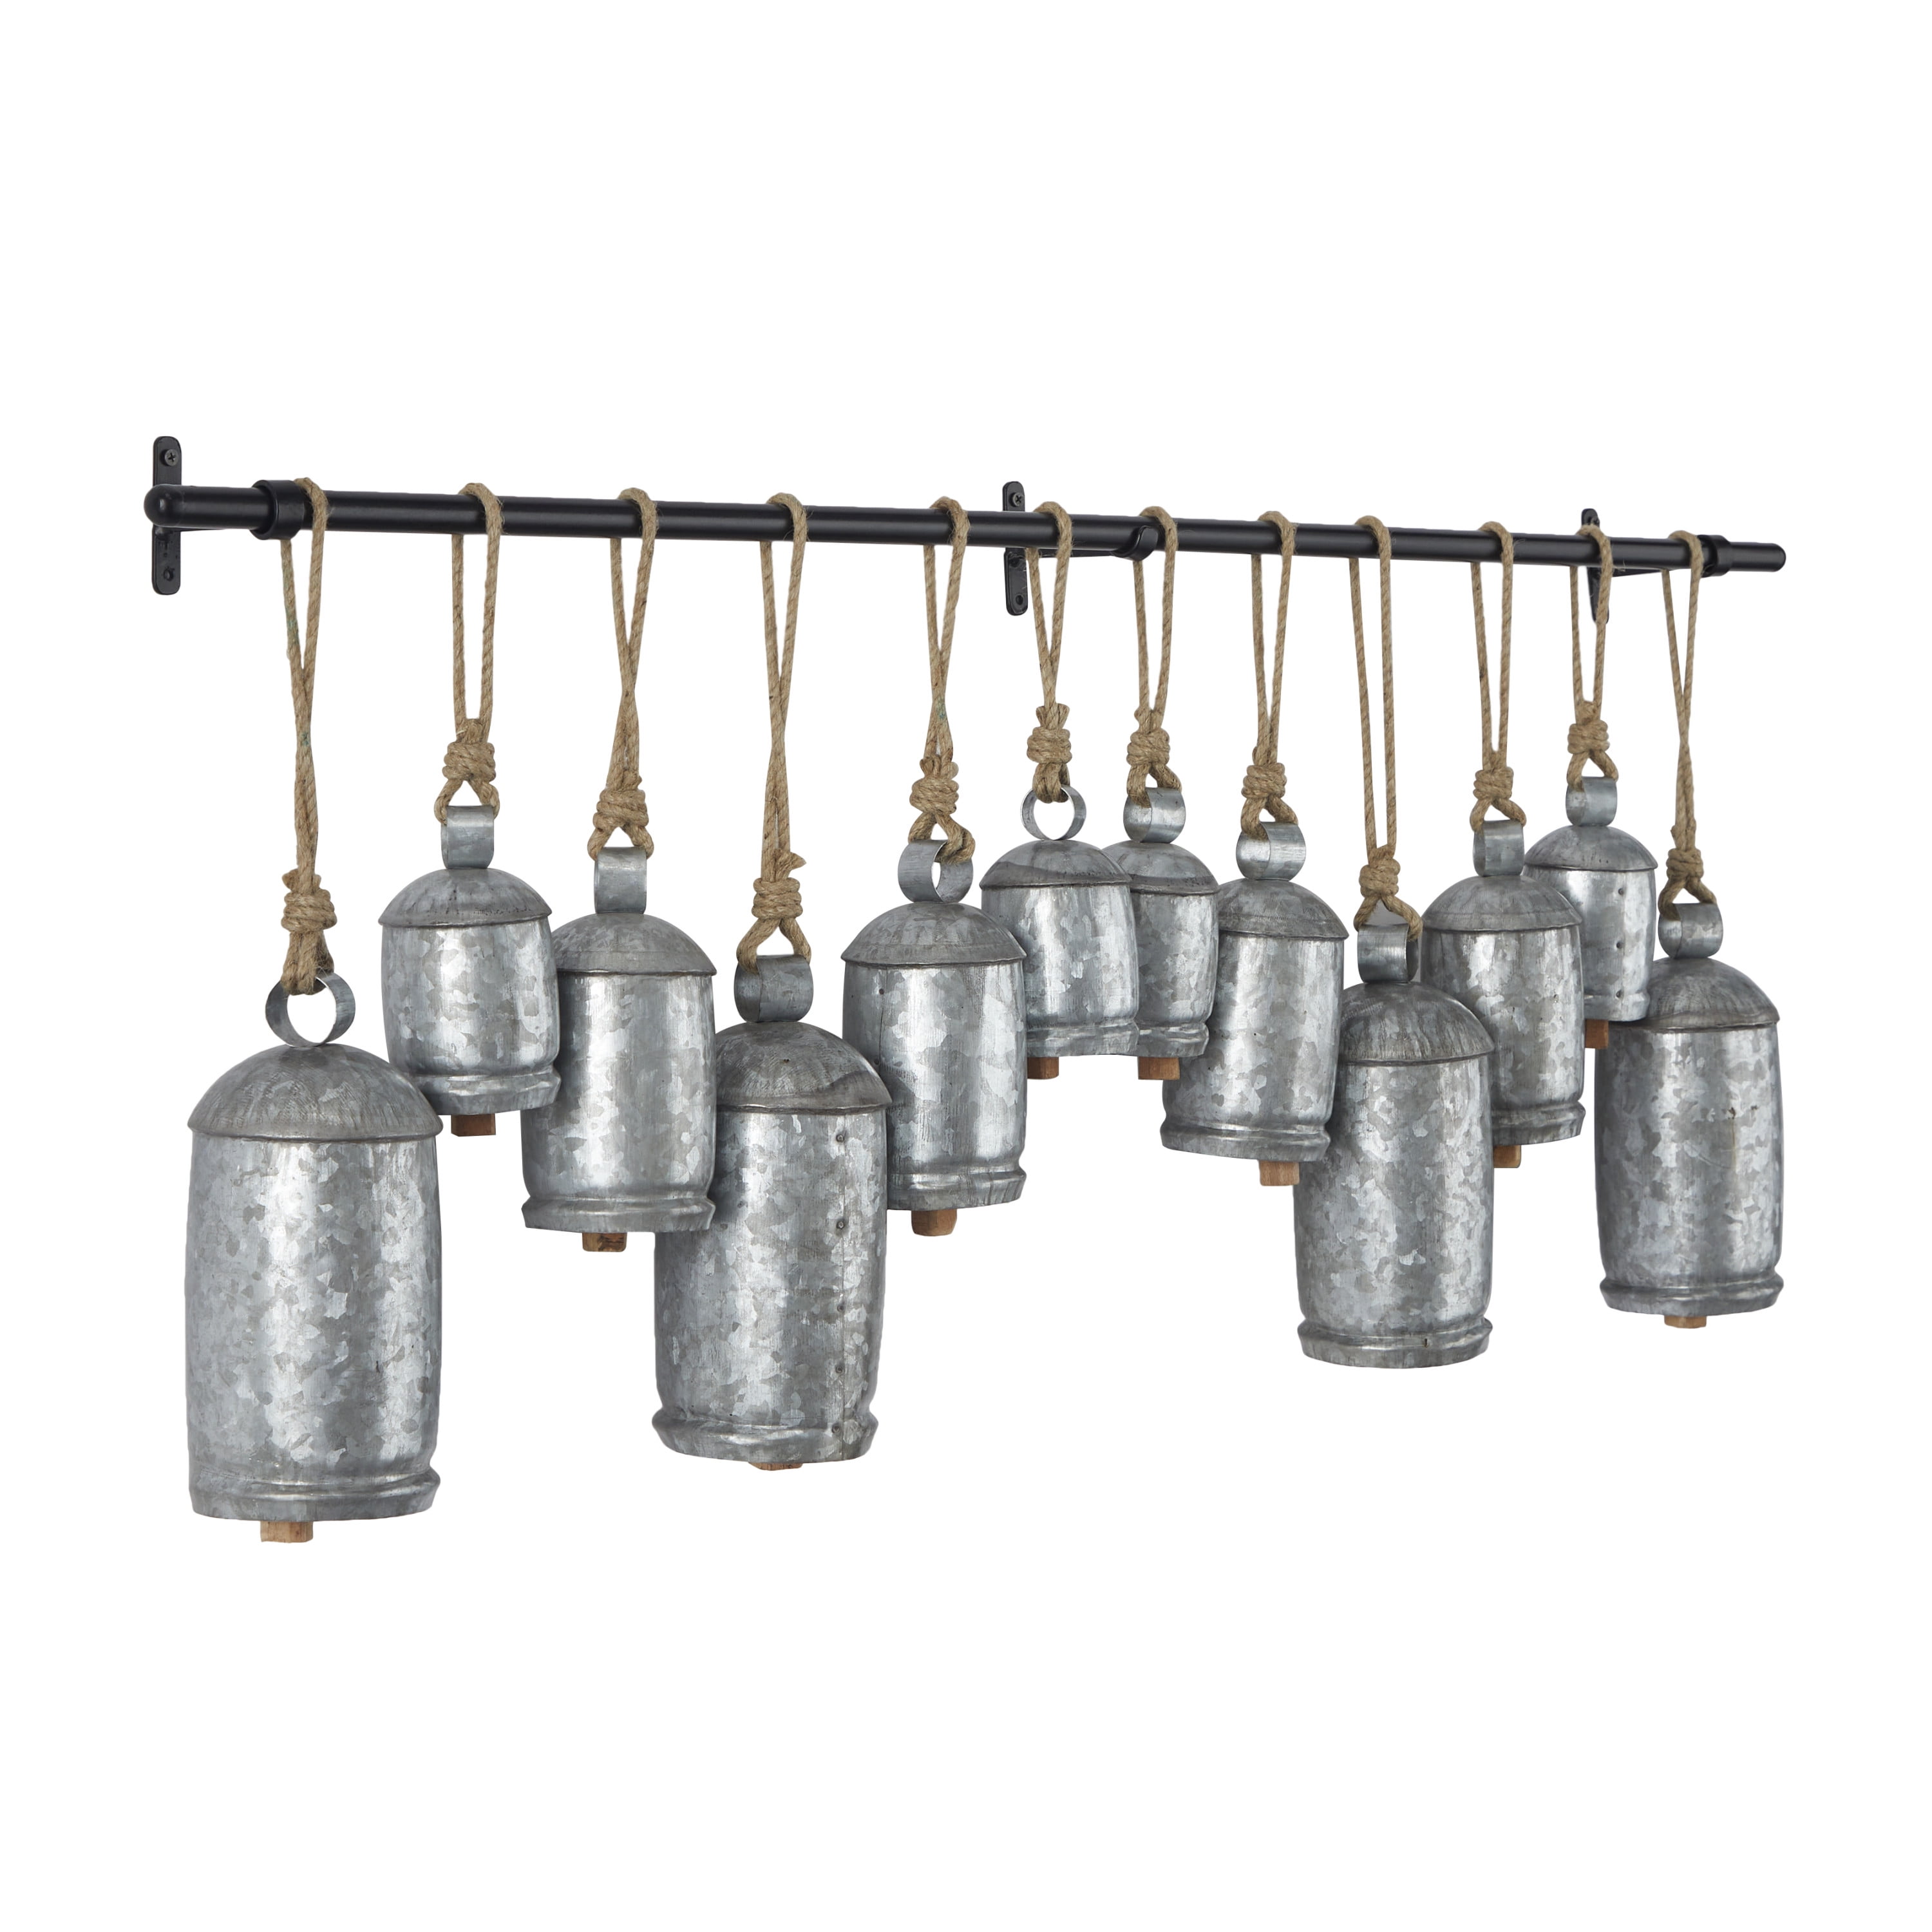 DecMode Bronze Metal Tibetan Inspired Decorative Hanging Bell Chime Set of  3 5, 4, 3H, Features a Round Shape with Solid Pattern and Metal Clappers